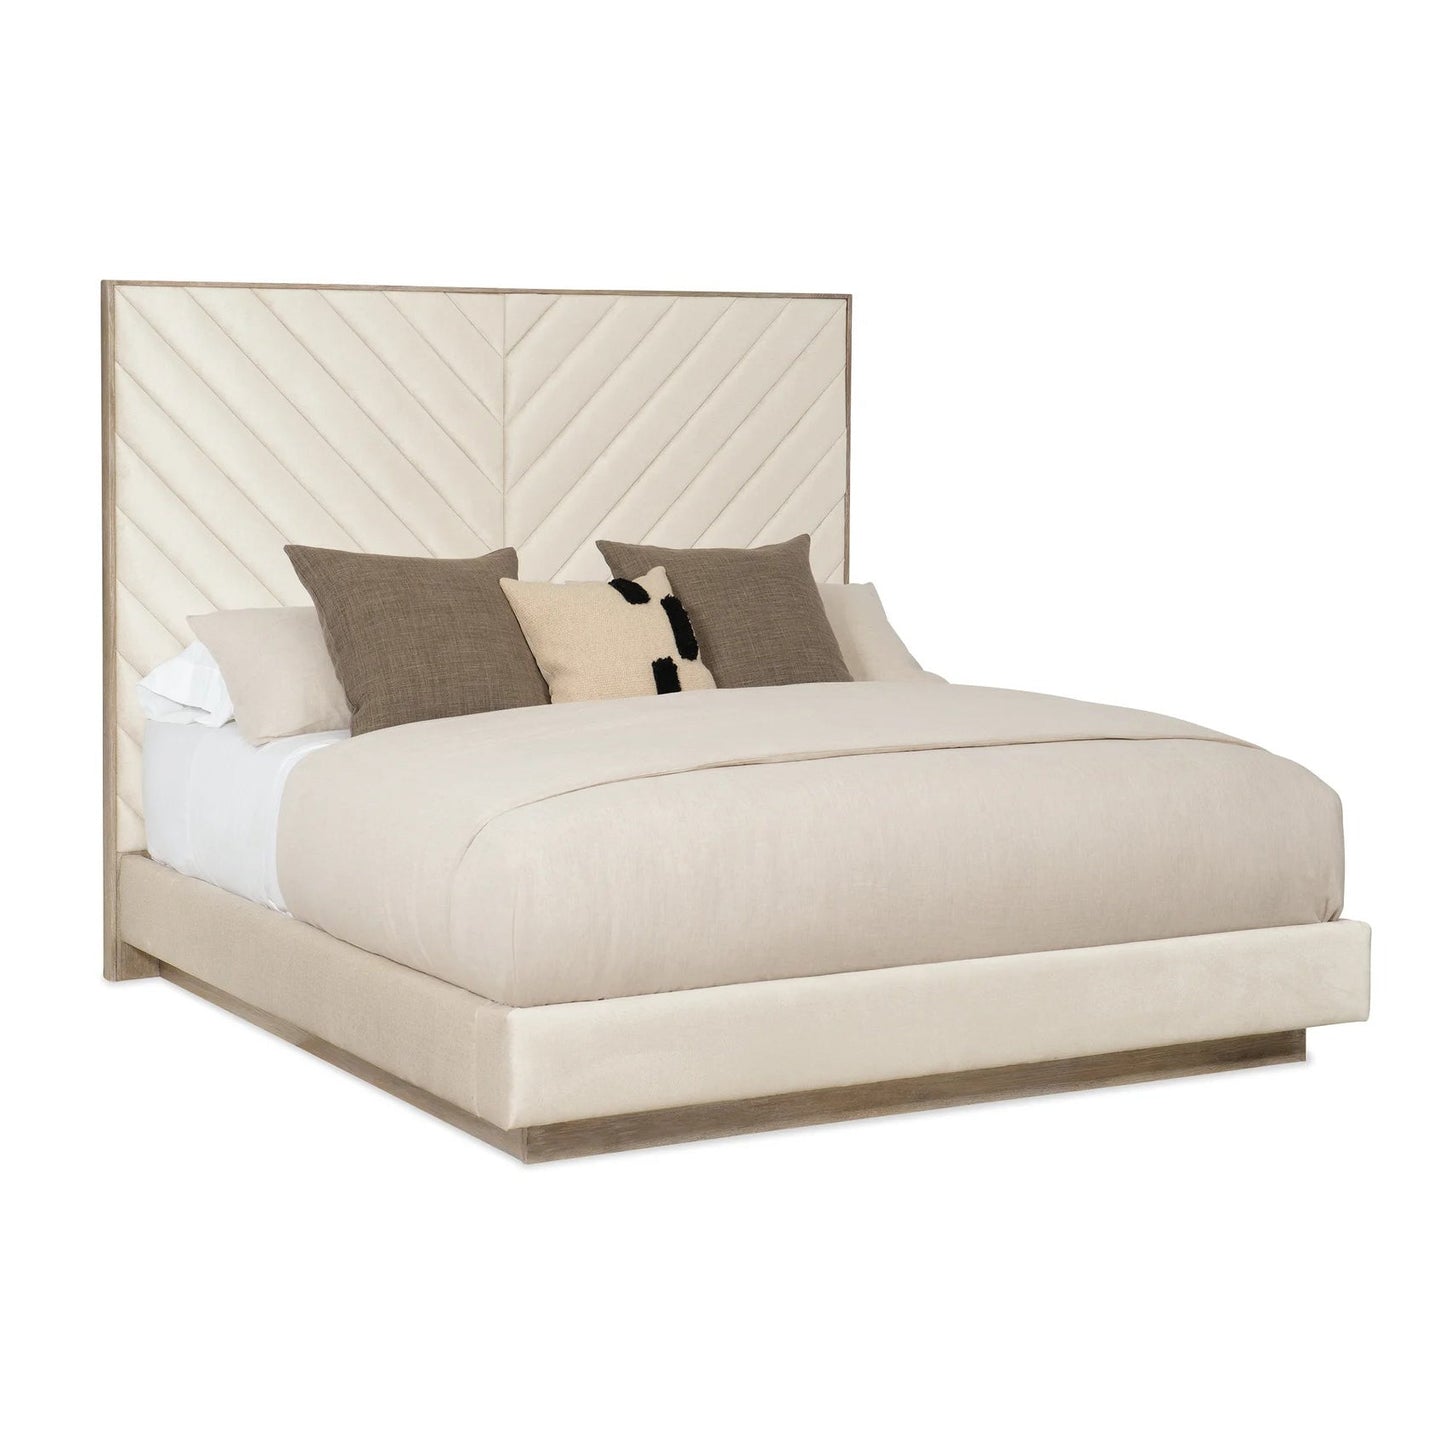 Meet You in the Middle Platform Bed